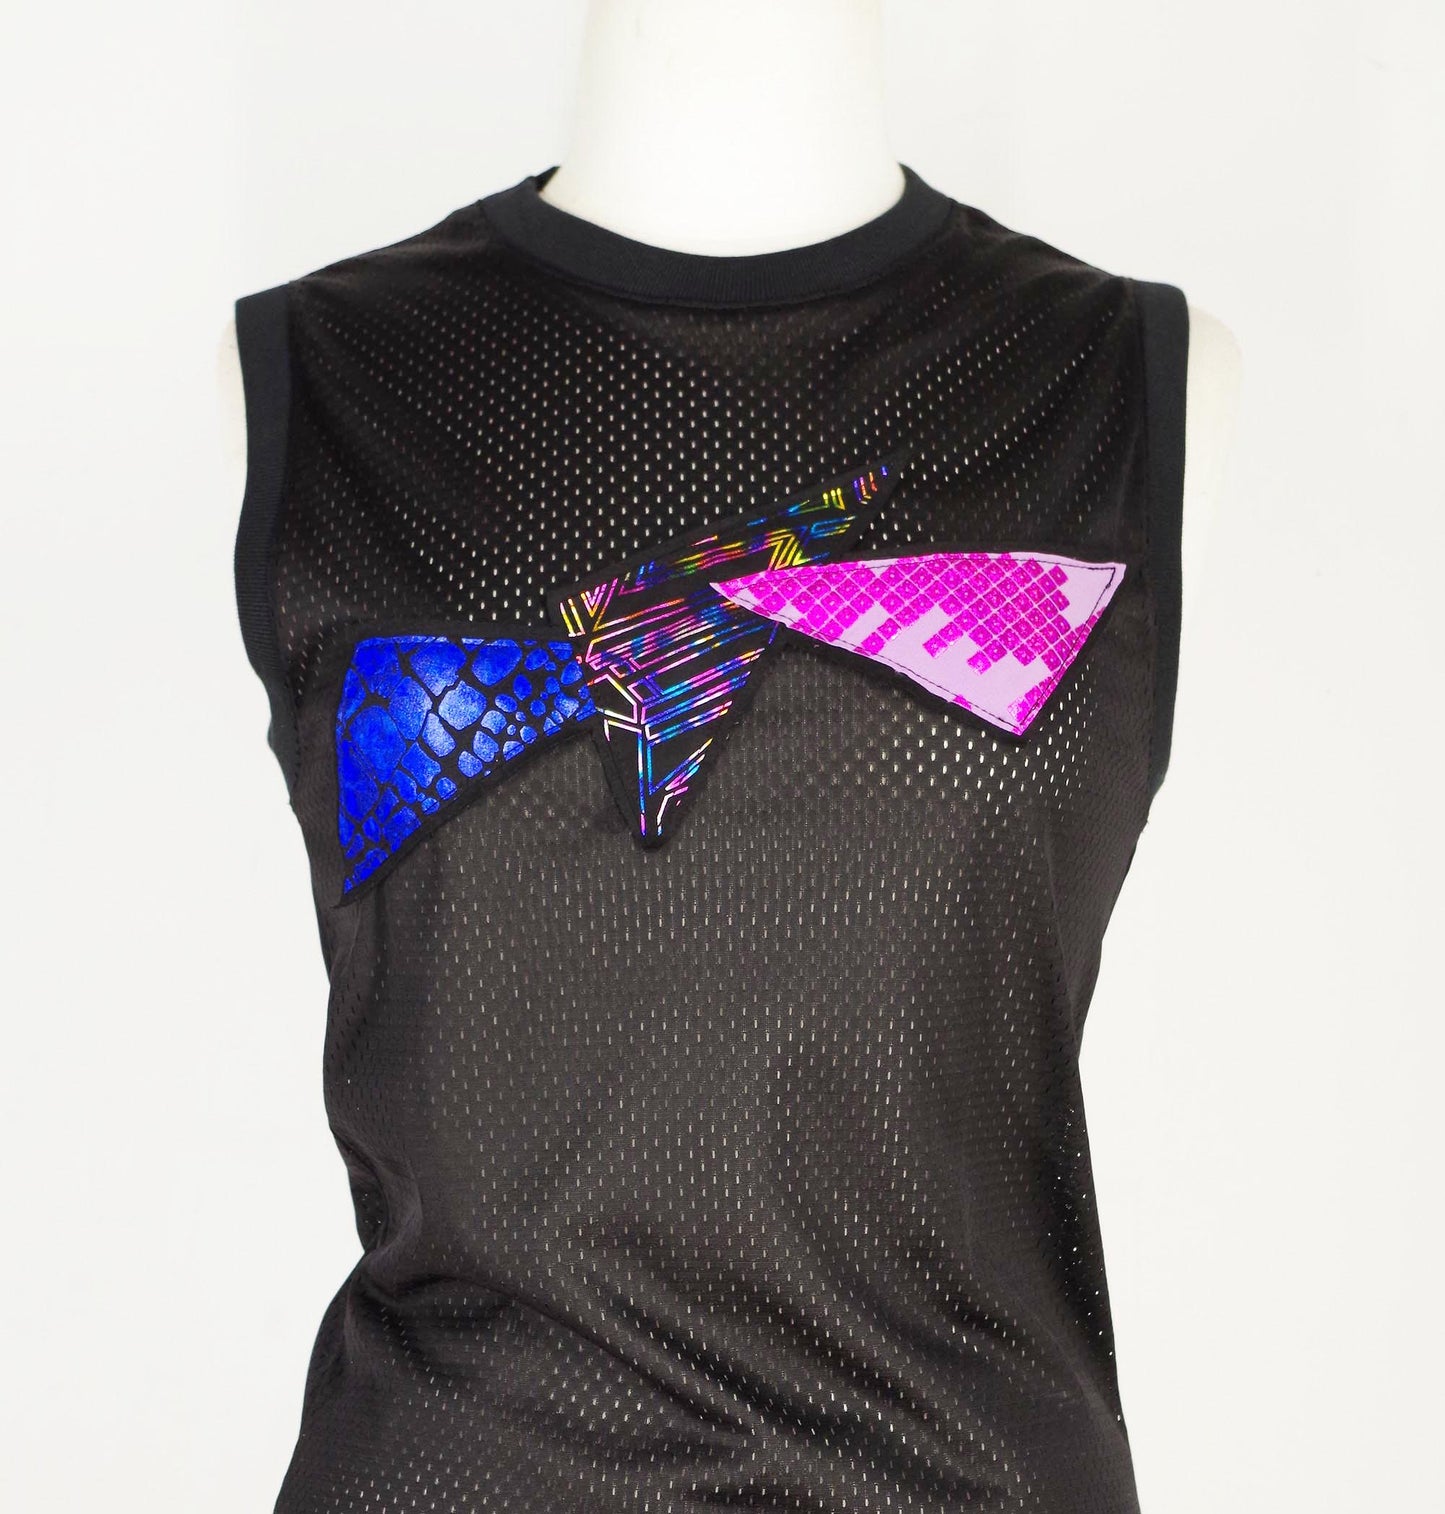 Festival Mesh Top with Metallic Triangles